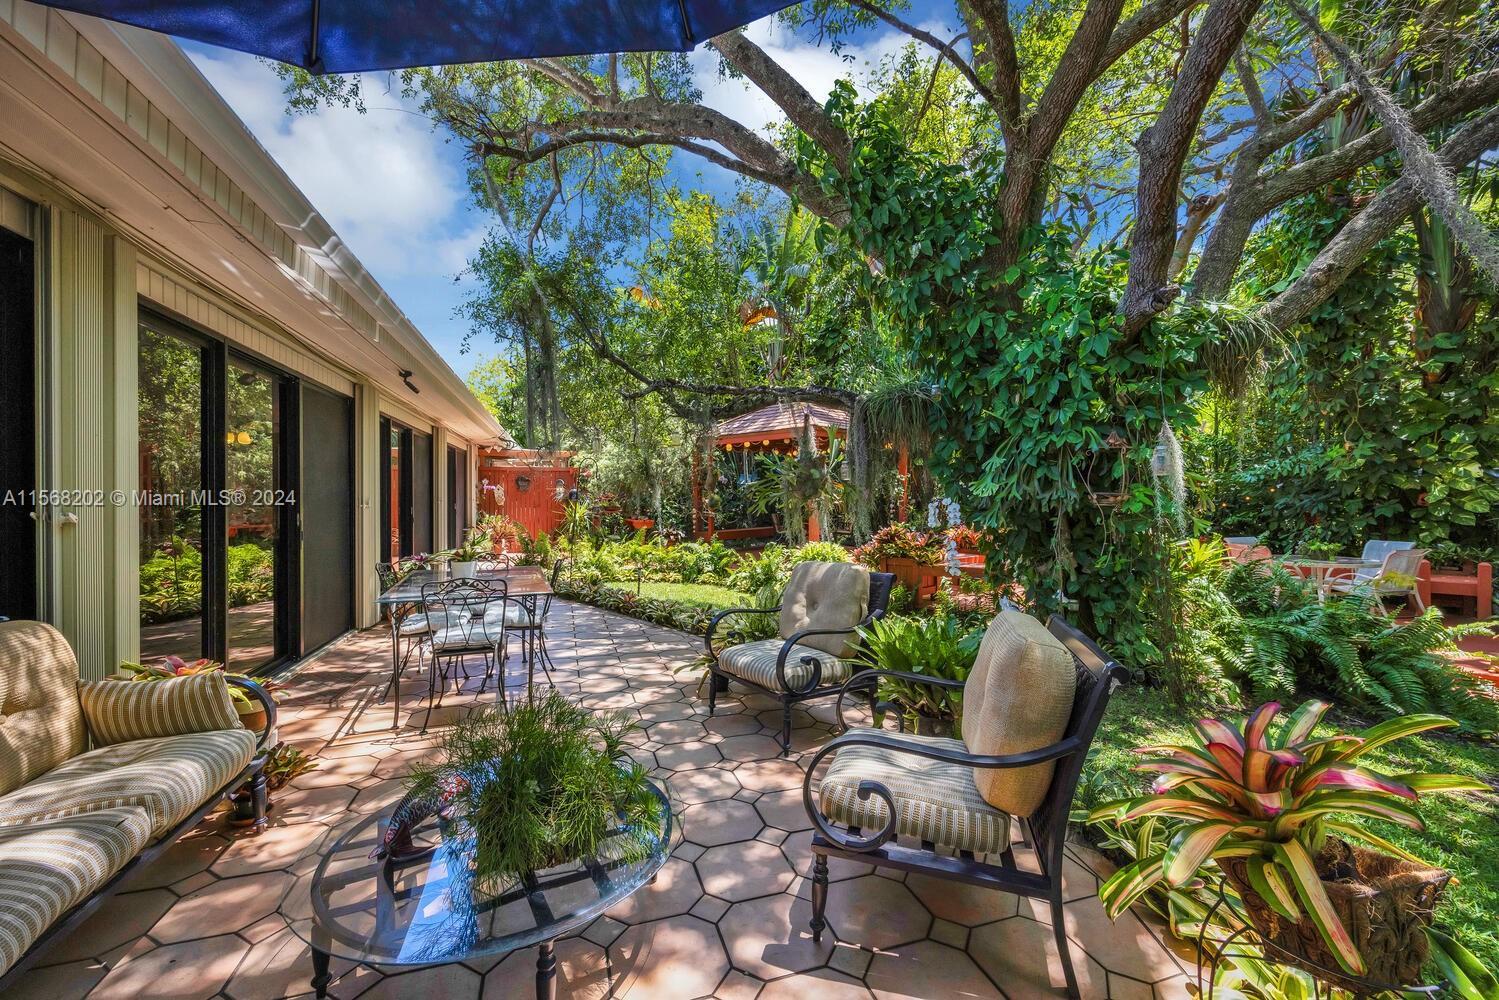 Reminiscent of Fairchild Tropical Garden, this very private oasis will delight & enchant you w/ its 